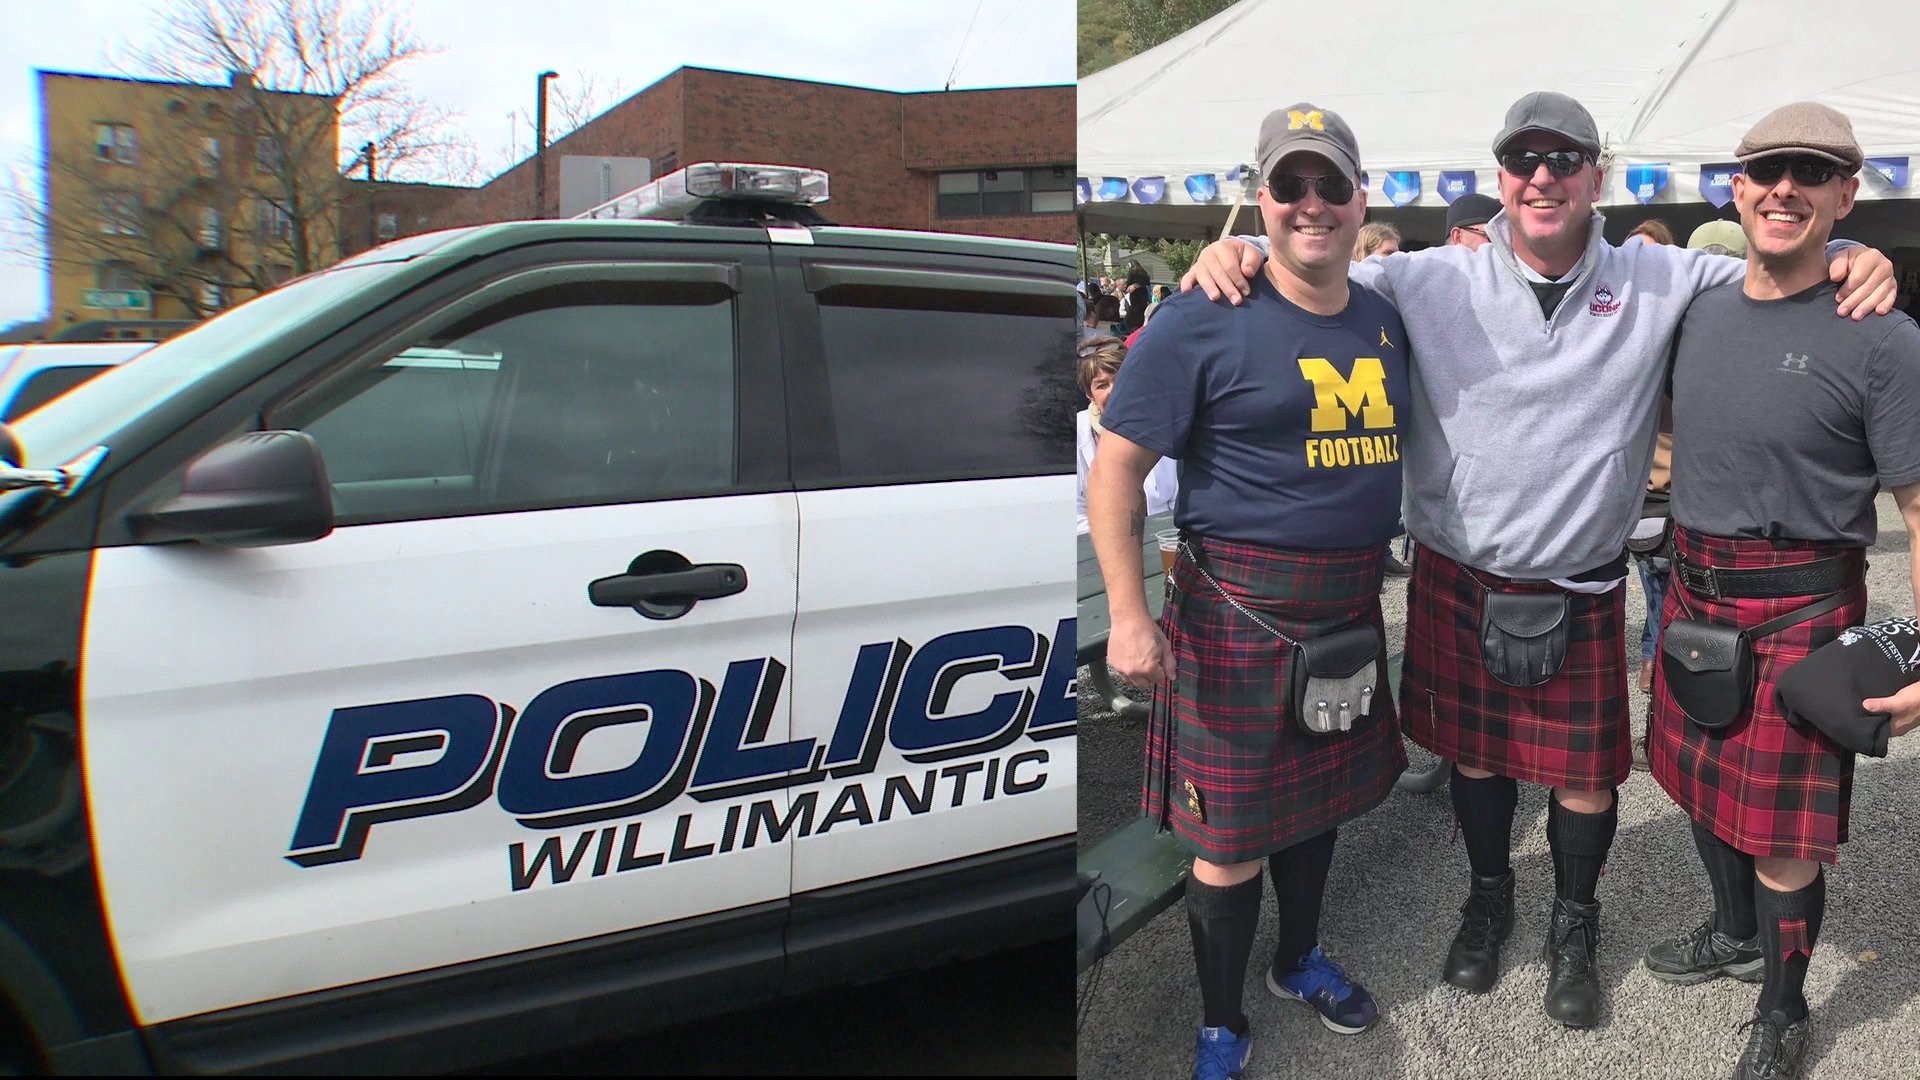 Willimantic Ultra Run for Cancer